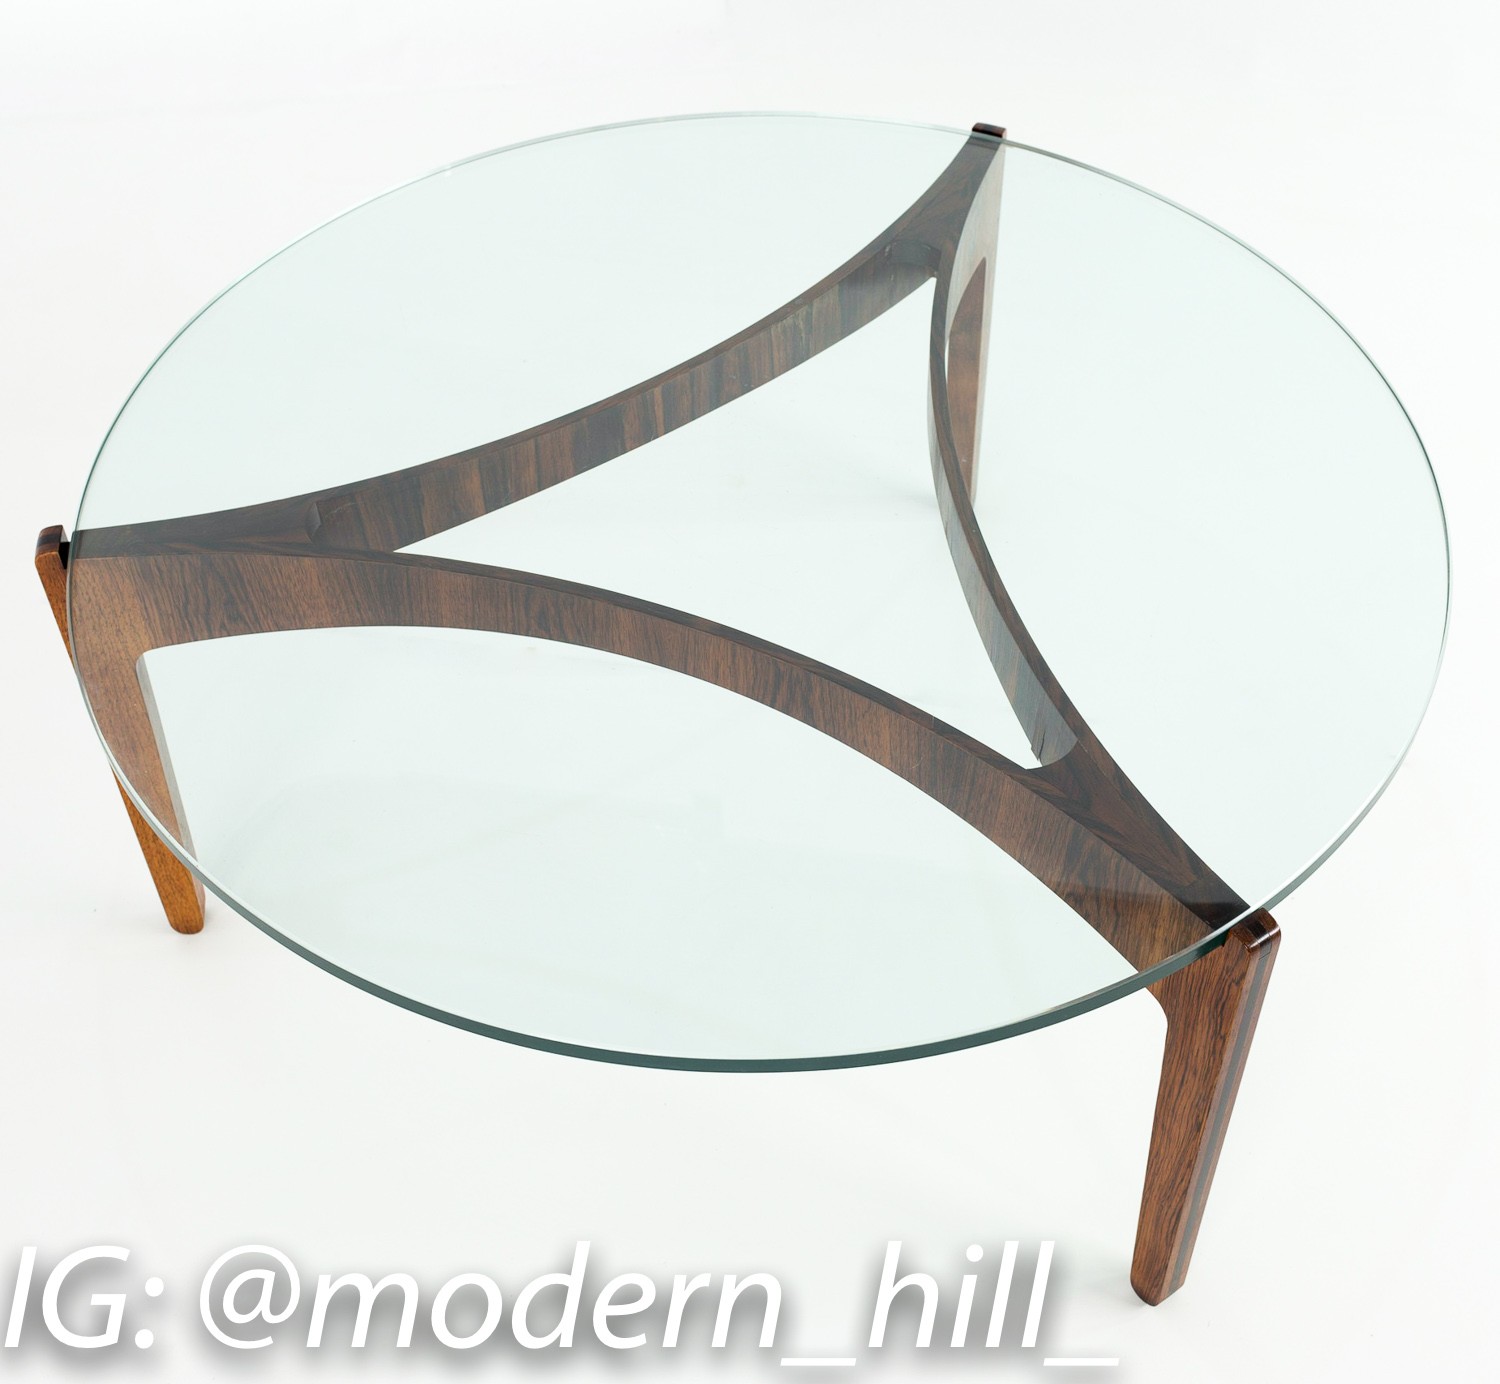 Sven Elekjaer Mid Century Modern Rosewood and Glass Round Coffee Table